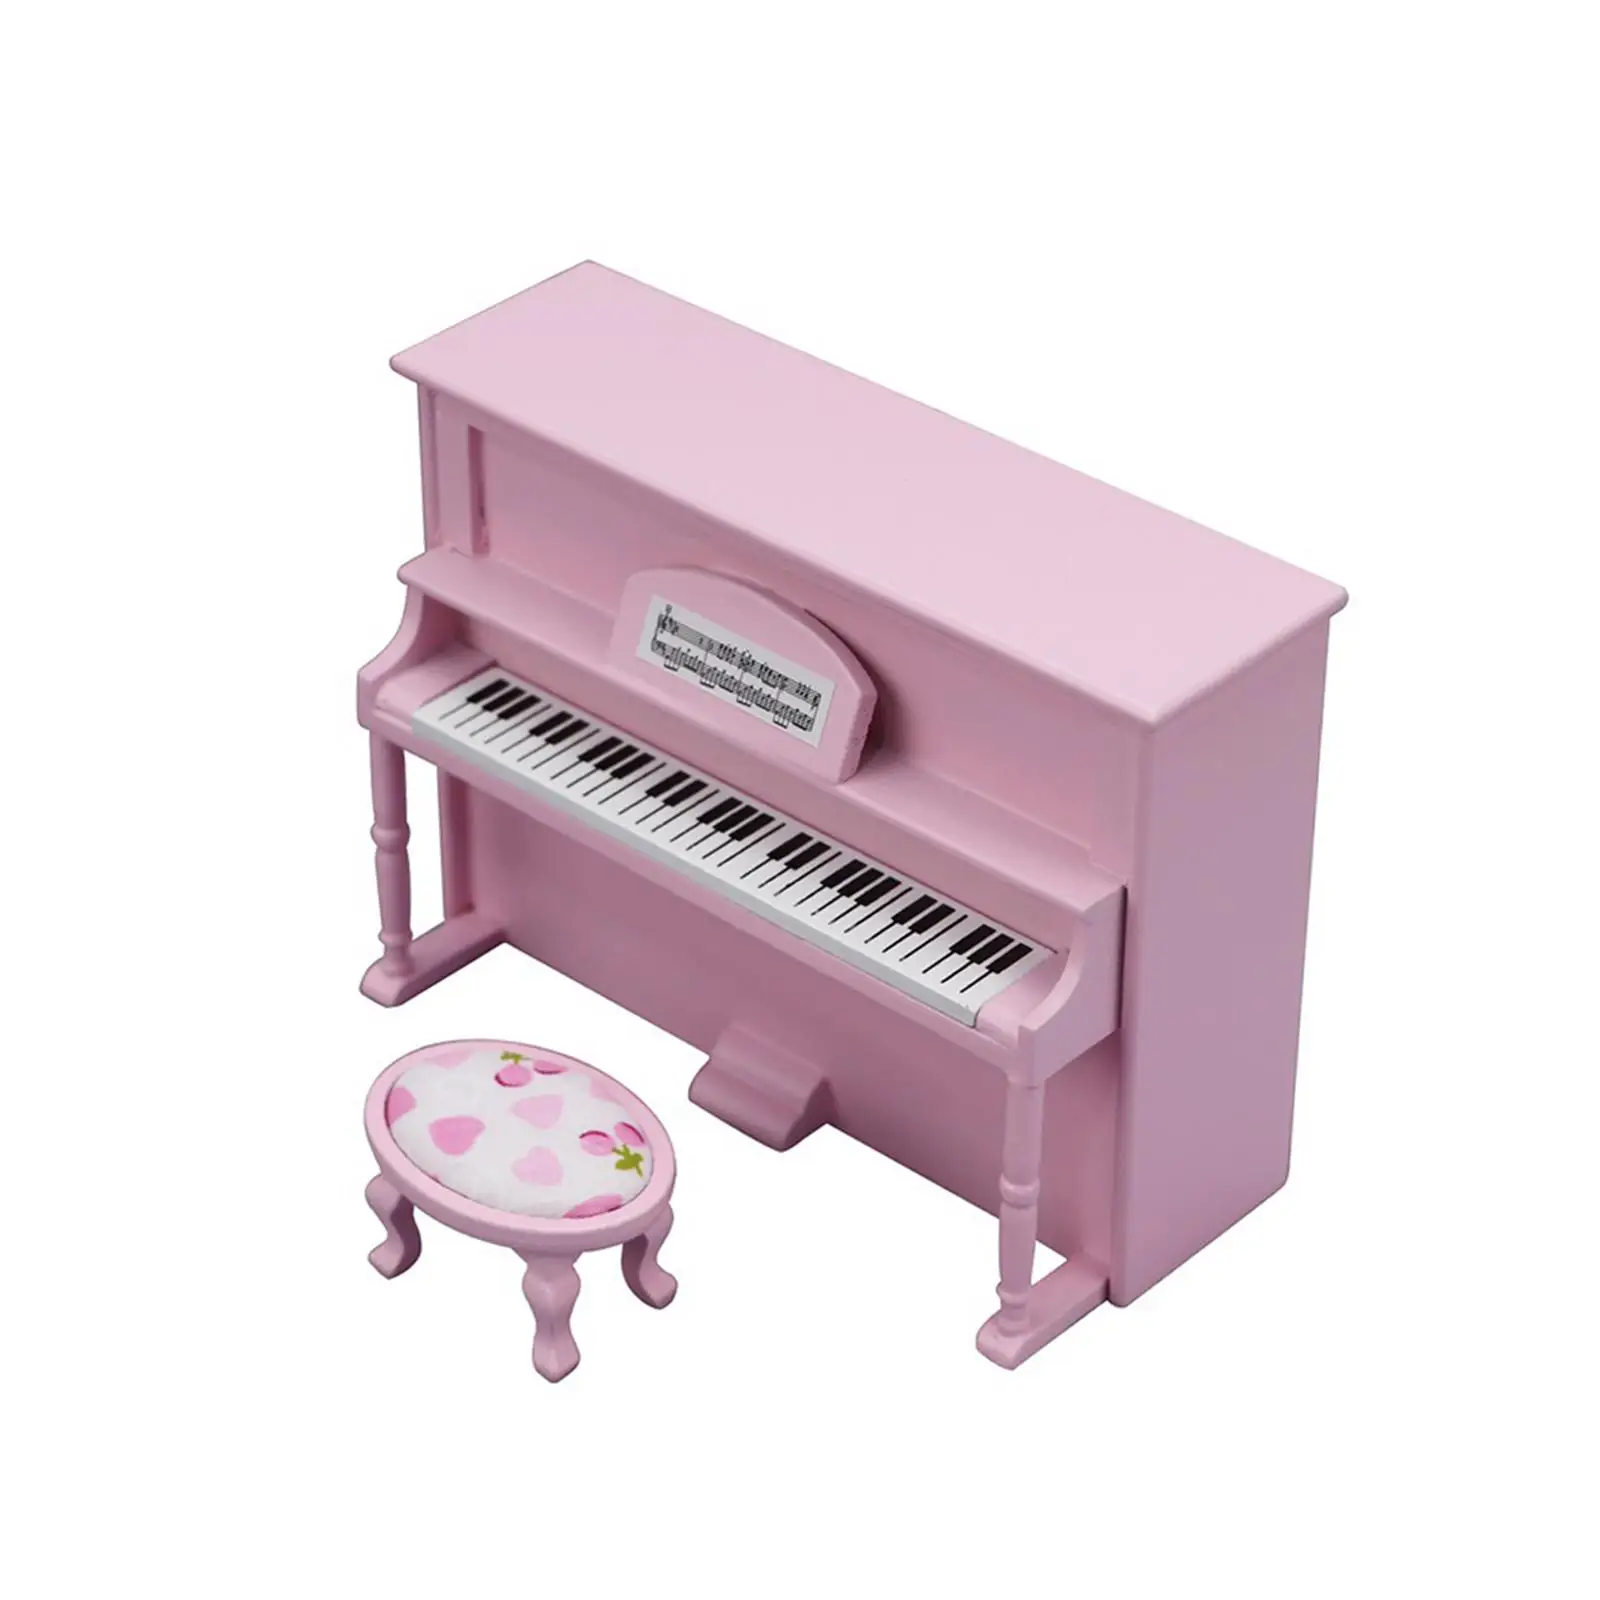 Miniature Piano Model with Chair Home Elegant Piano Decoration Ornaments